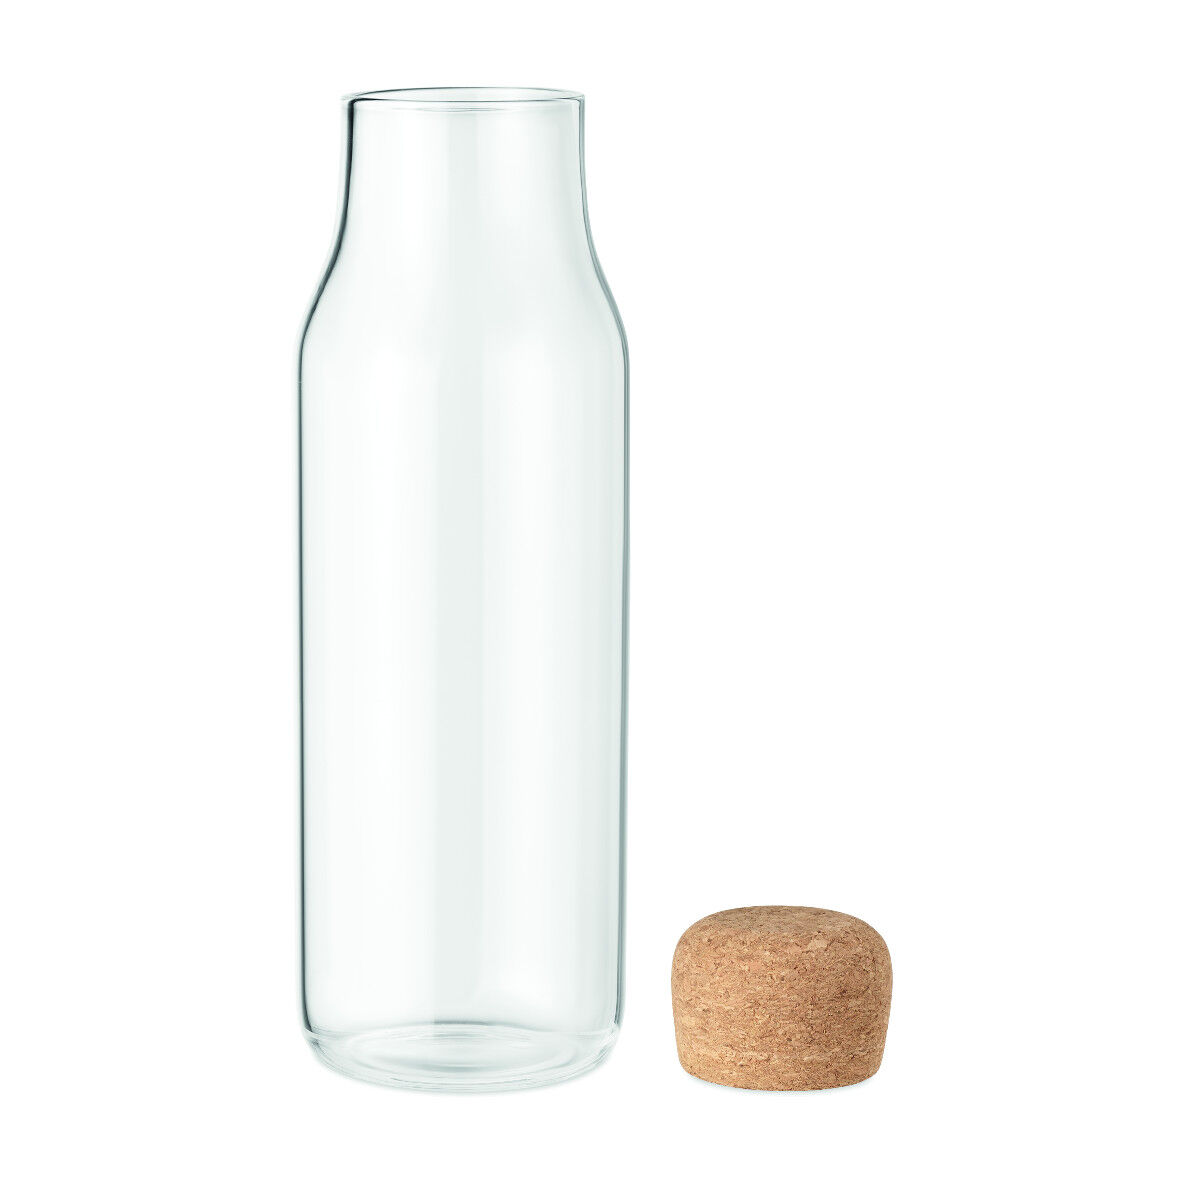  Glass Decanter water bottle with a cork lid